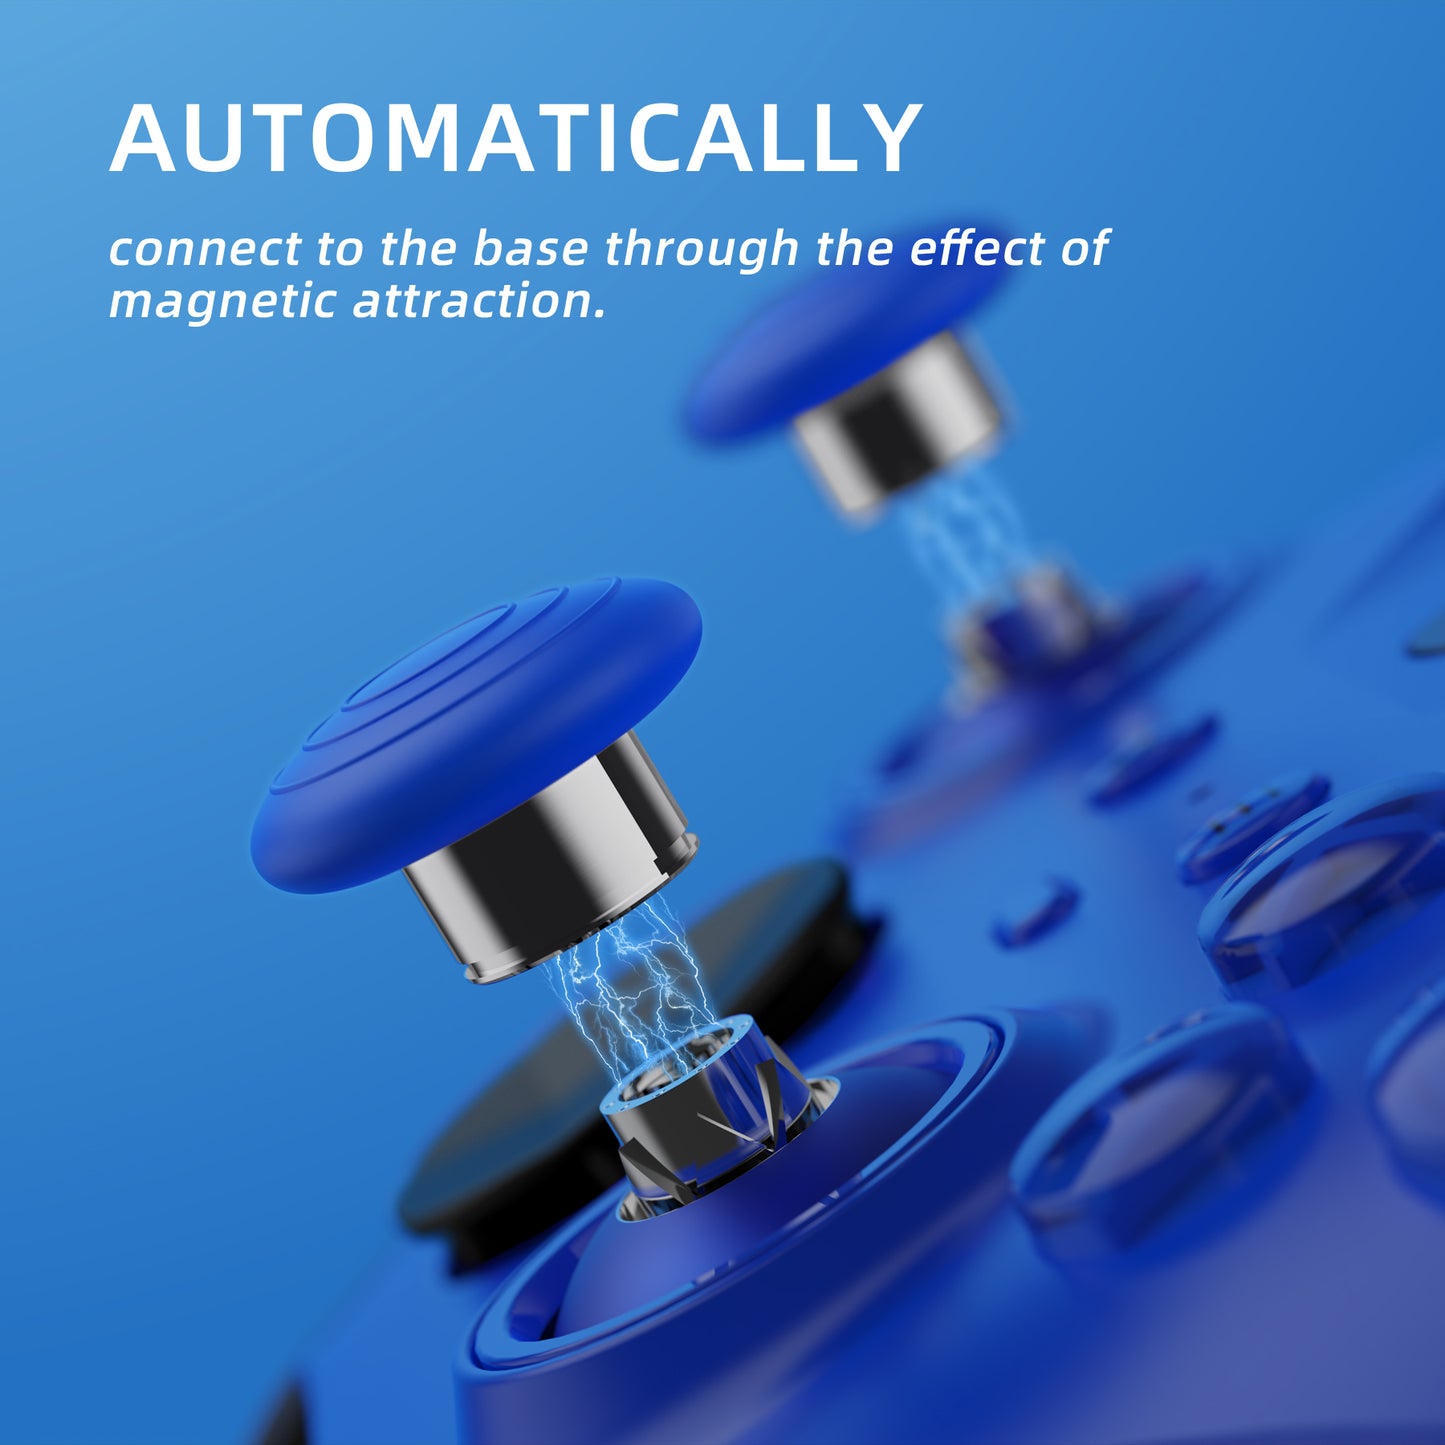 eXtremeRate 6 in 1 Metal Replacement Thumbsticks for Xbox Elite Series 2 & Elite 2 Core Controller (Model 1797) - Blue & Metallic Silver eXtremeRate